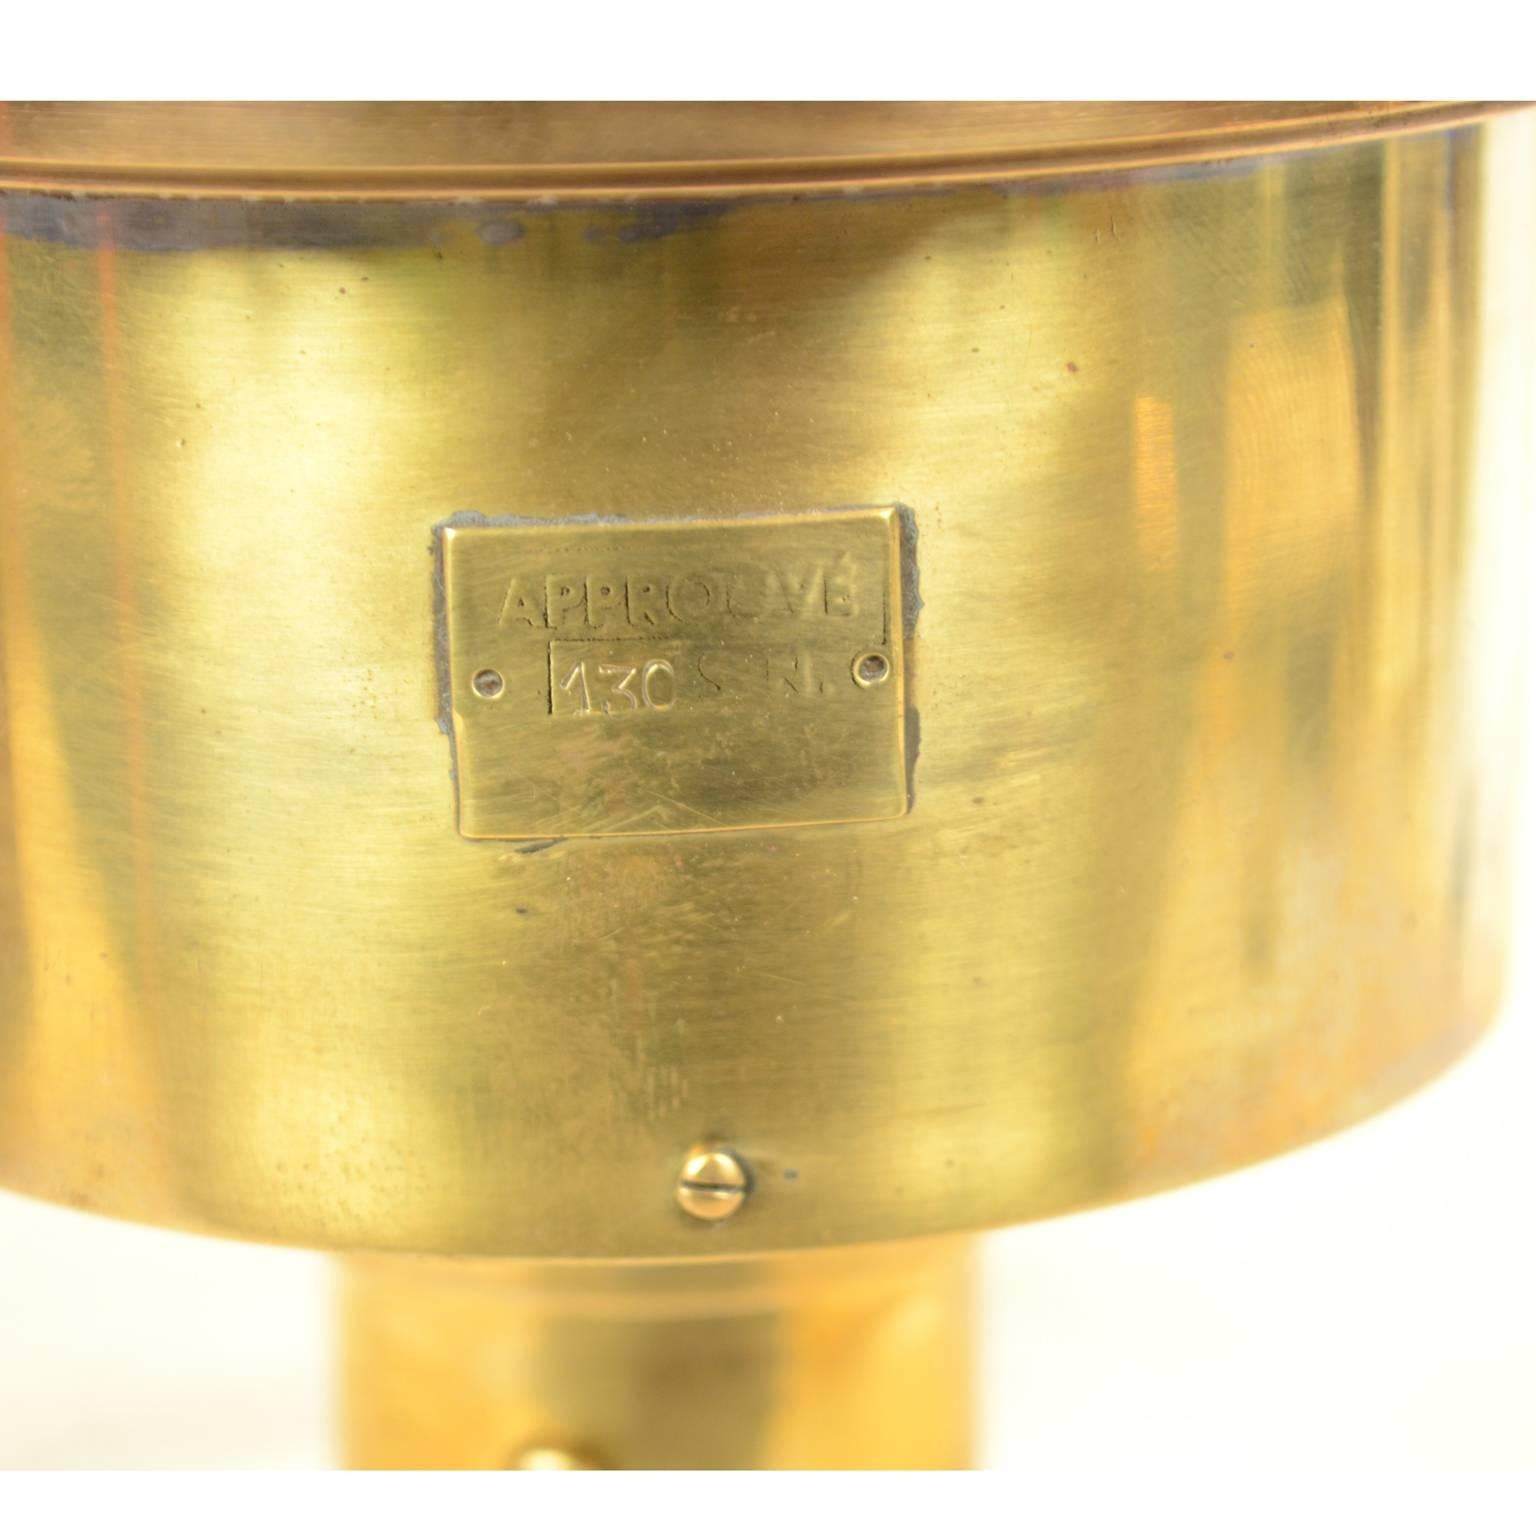 Nautical Brass Magnetic Compass with Original Box by E. Vion Paris, Early 1900 For Sale 8